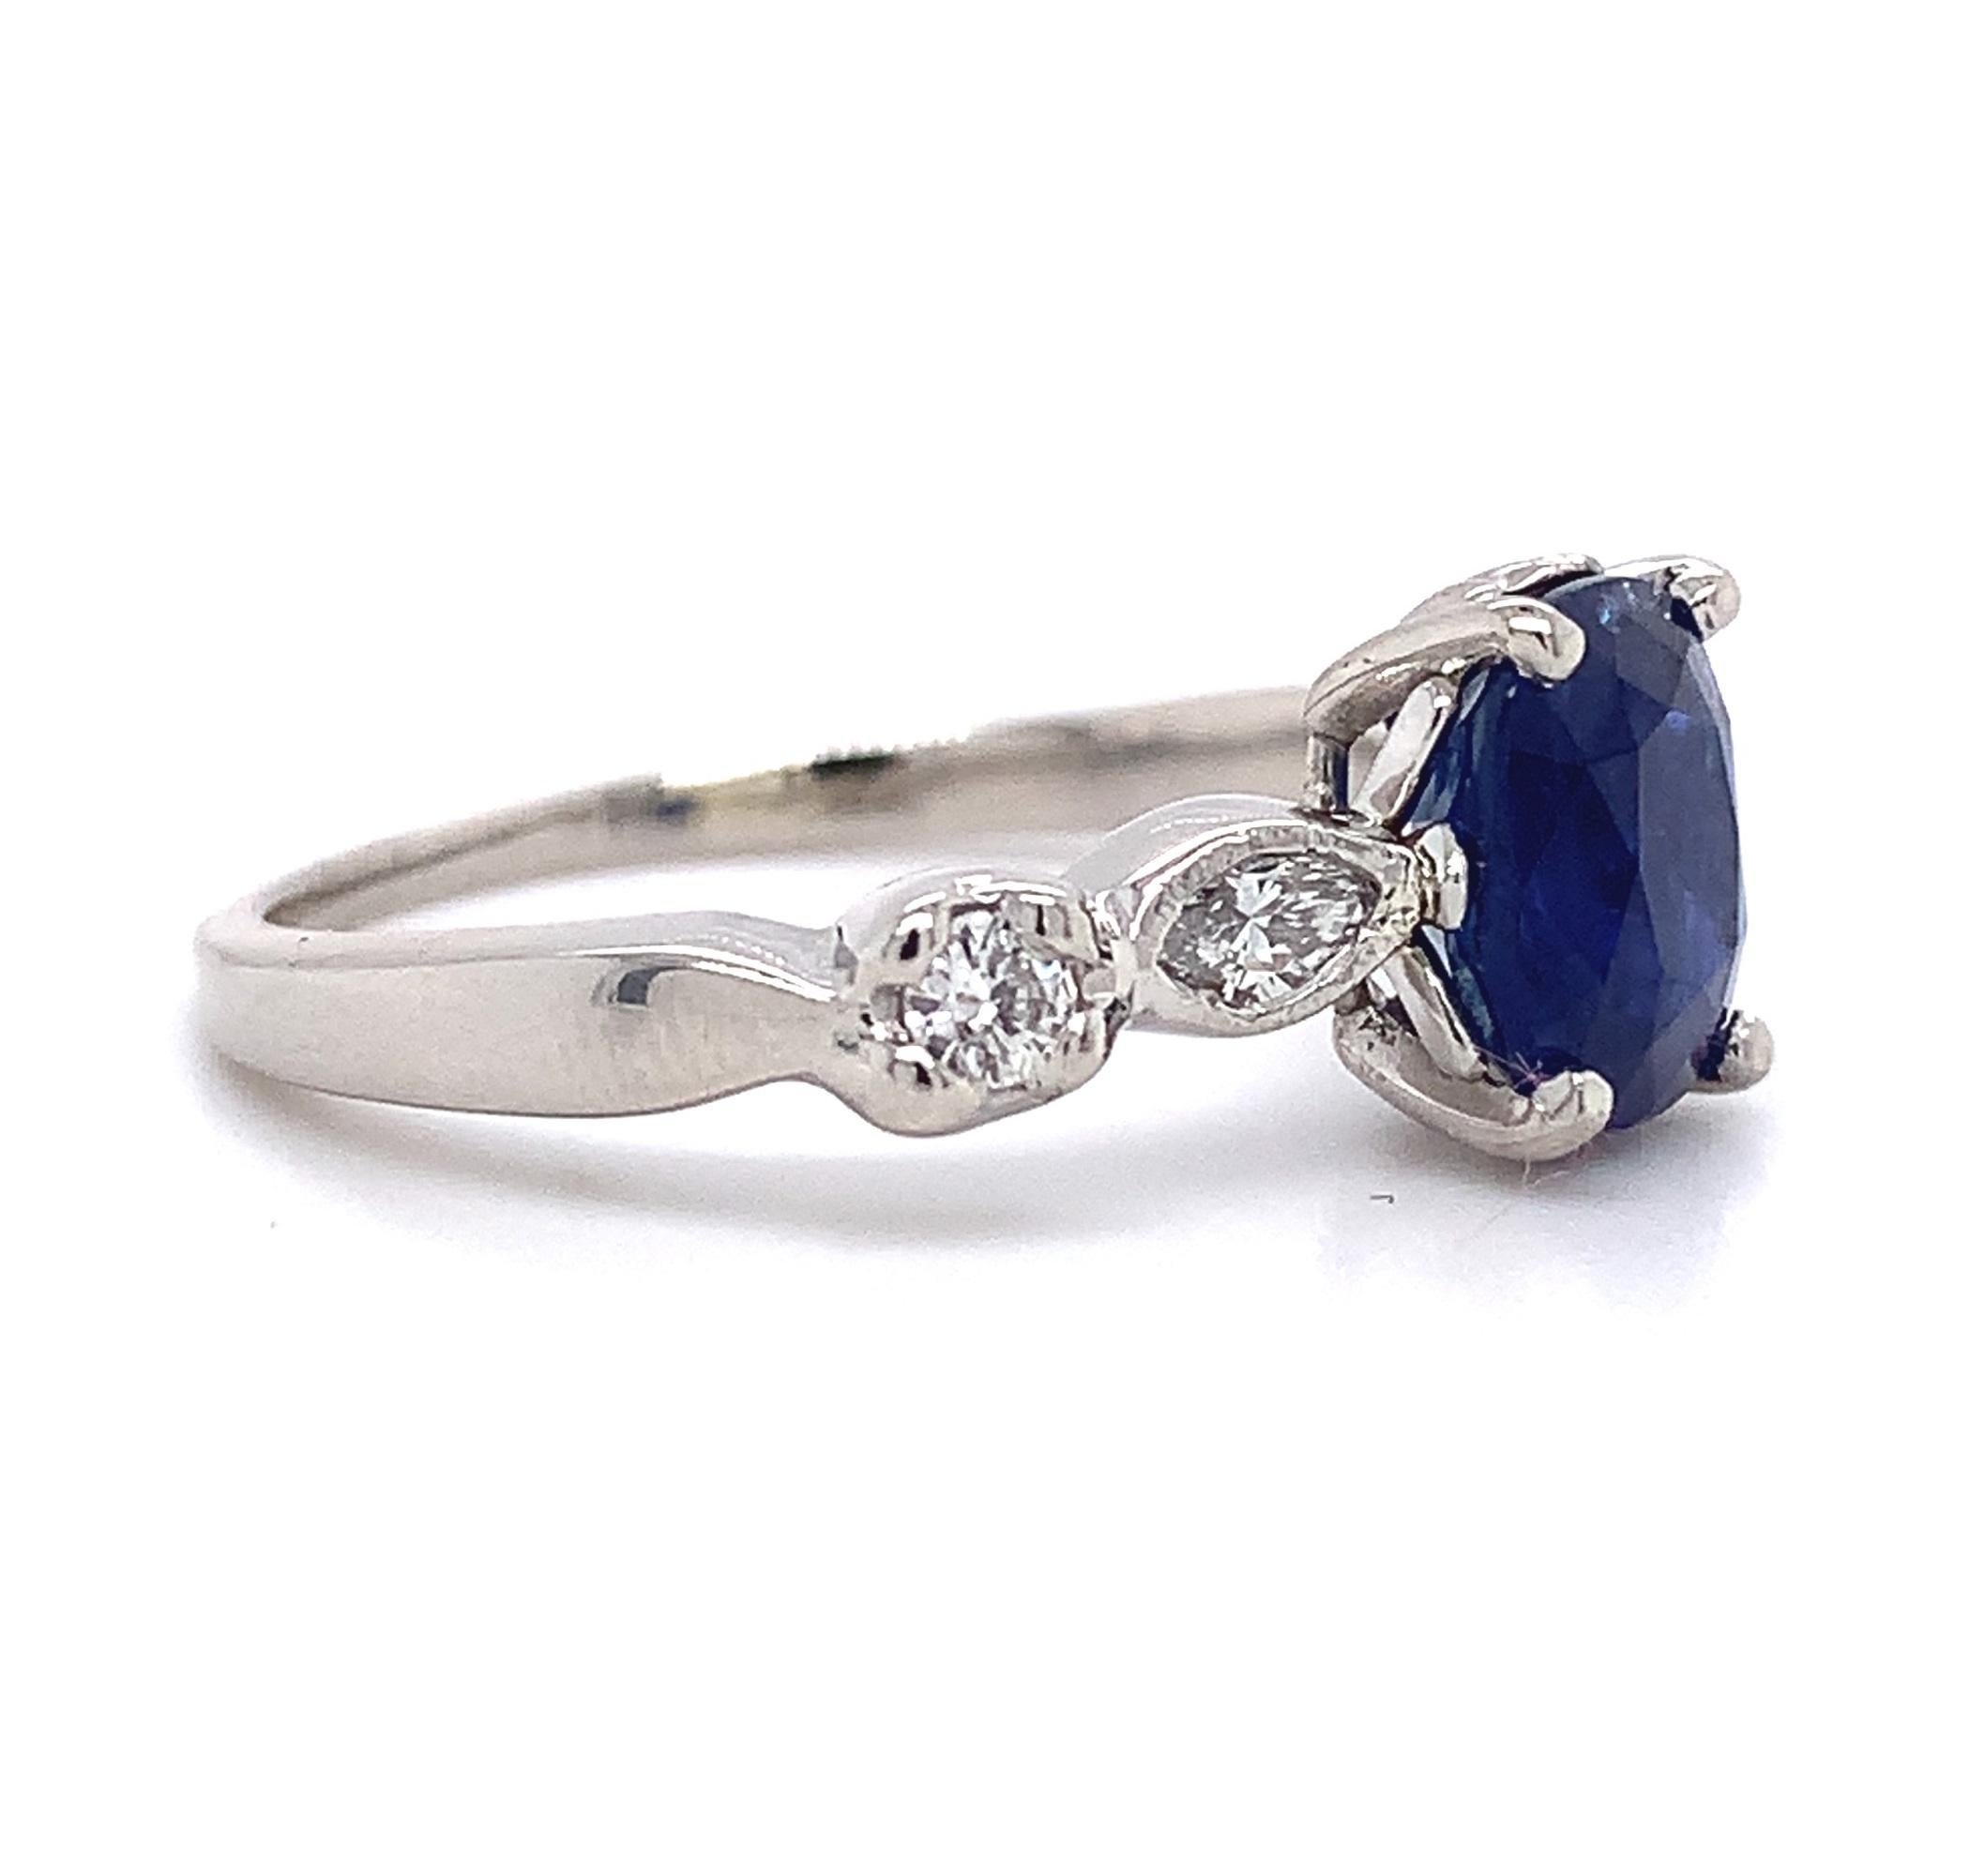 Platinum blue sapphire and diamond ring featuring a rectangular cushion cut sapphire weighing 2.13 carats. The genuine earth mined sapphire has royal blue color. It measures about 7.8mm x 6.6mm. The sapphire is accented by 2 marquise diamonds and 2